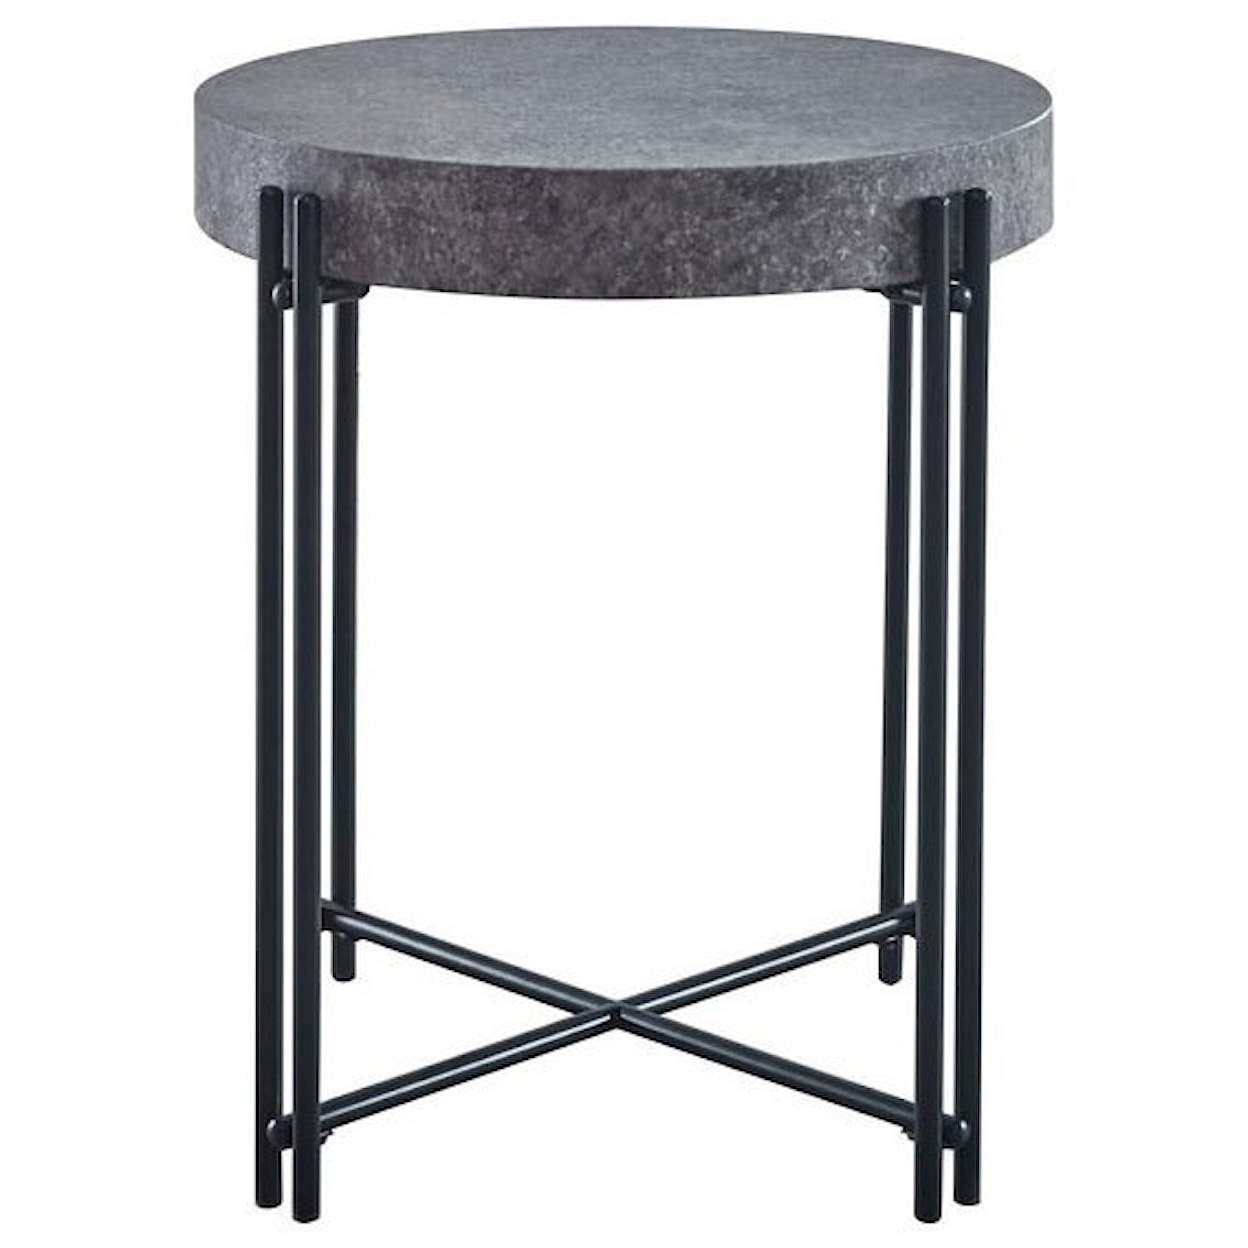 Steve Silver Morty MORTY GREY END TABLE |